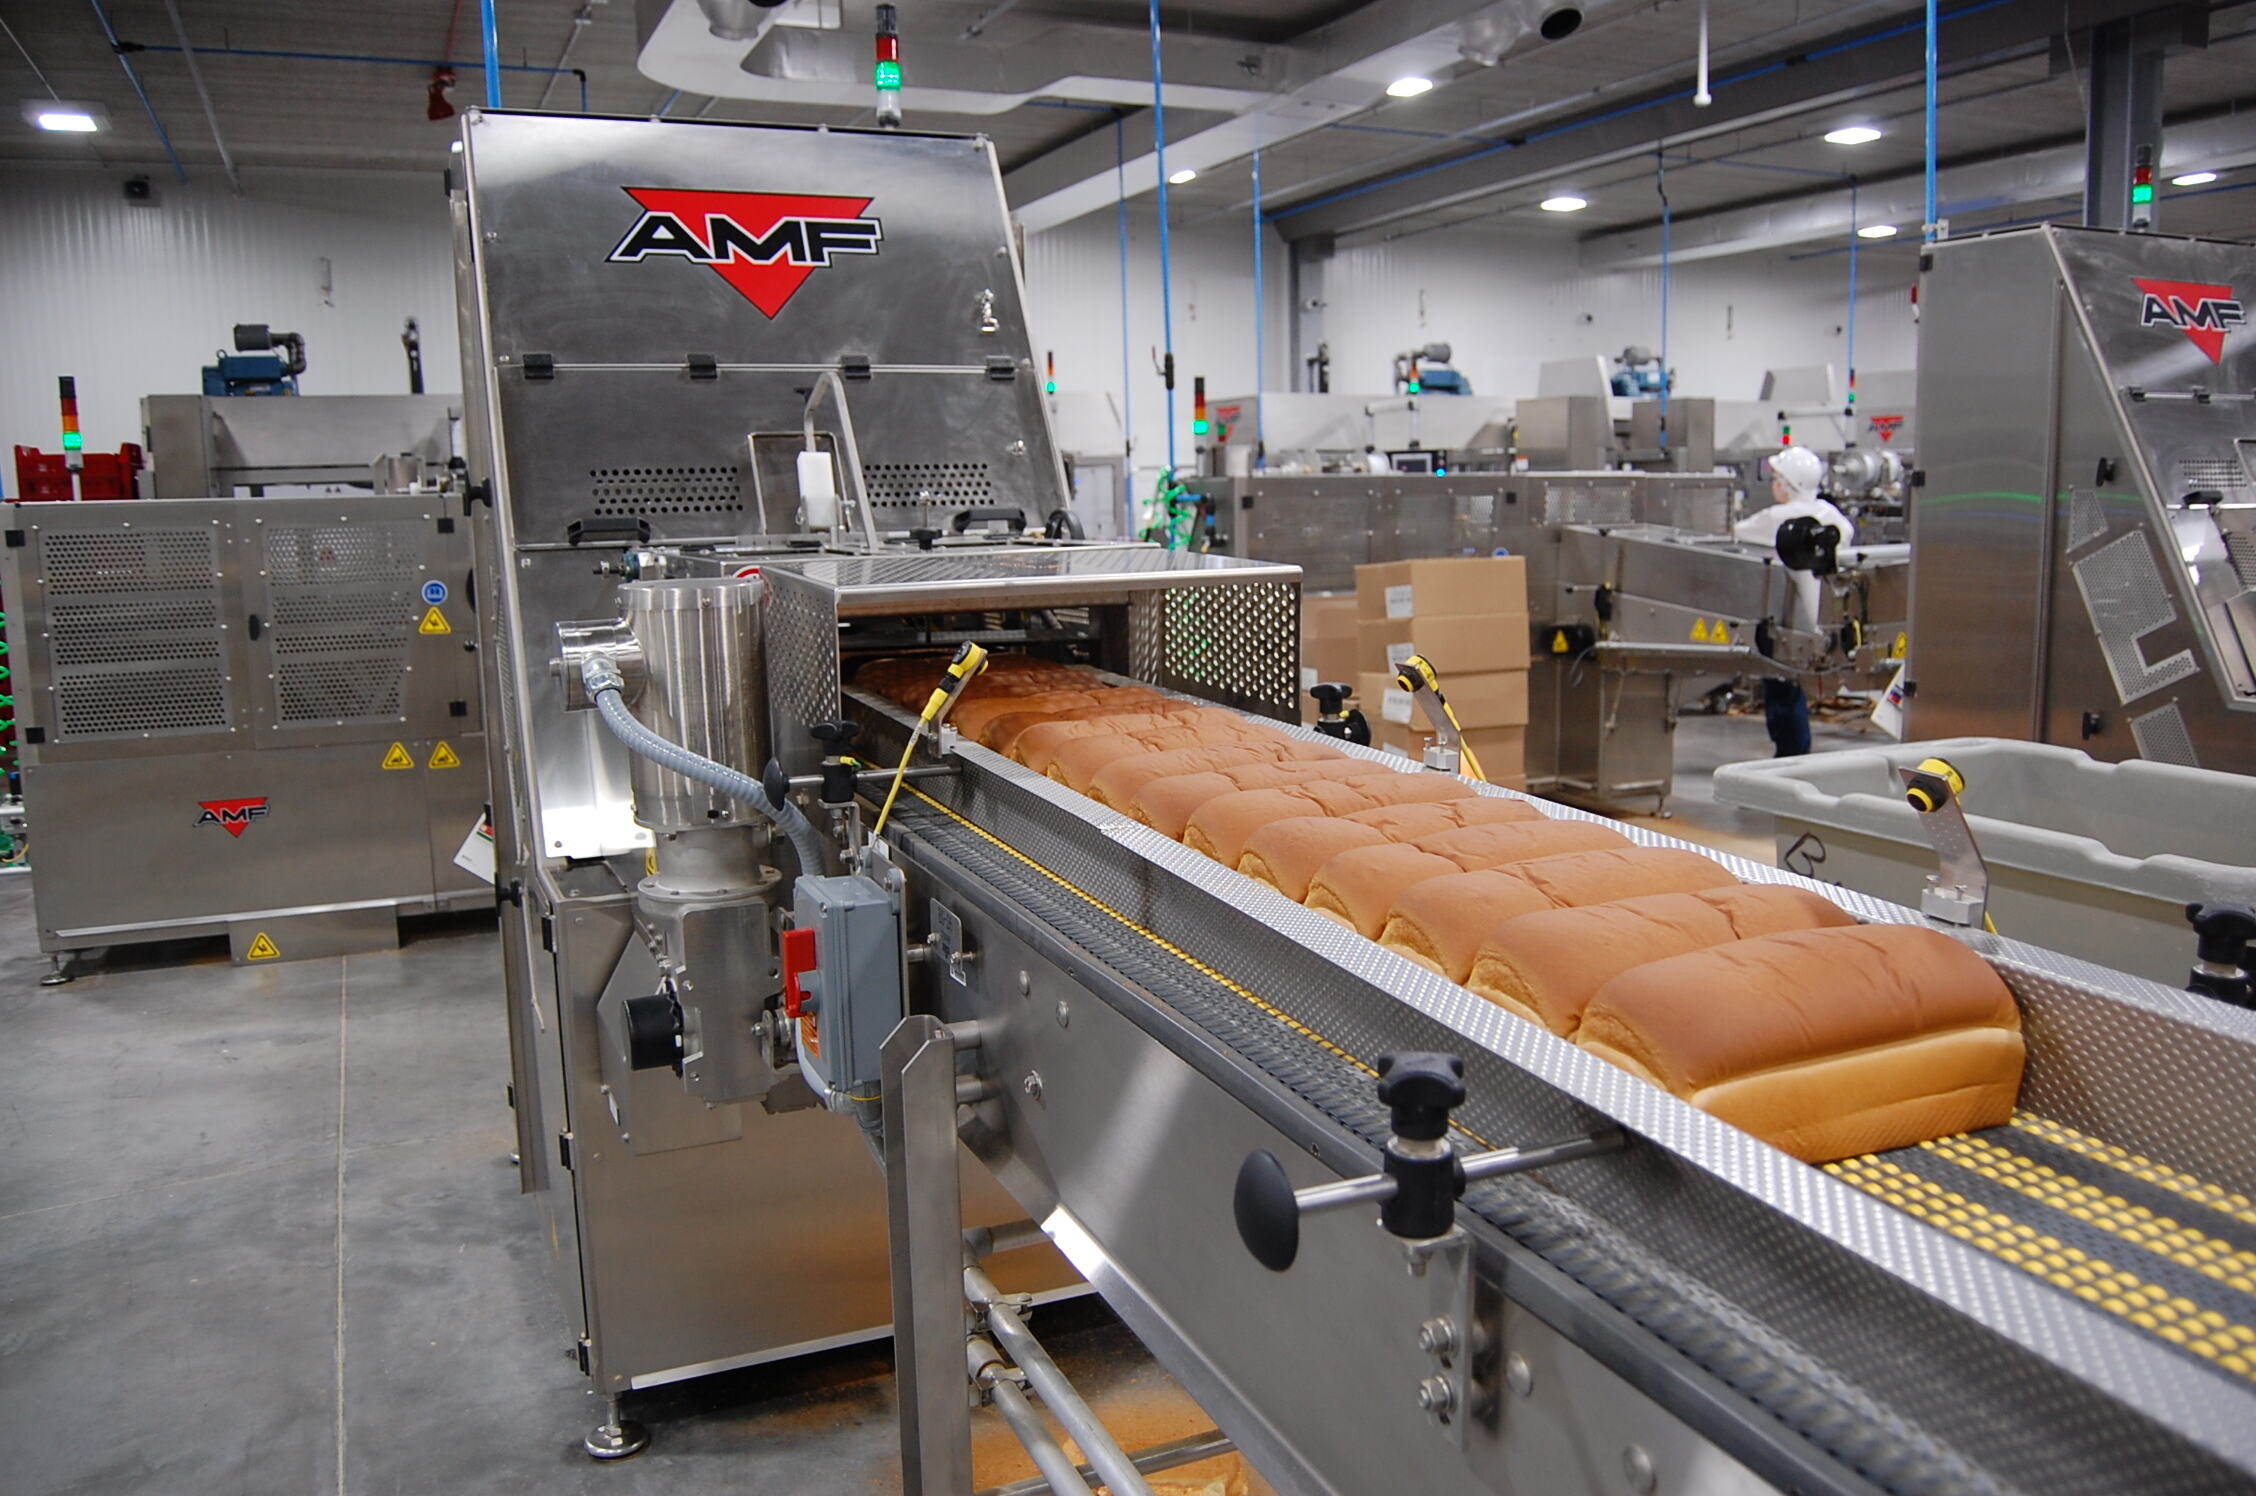 Industrial Bakery Slicing Equipment - LeMatic